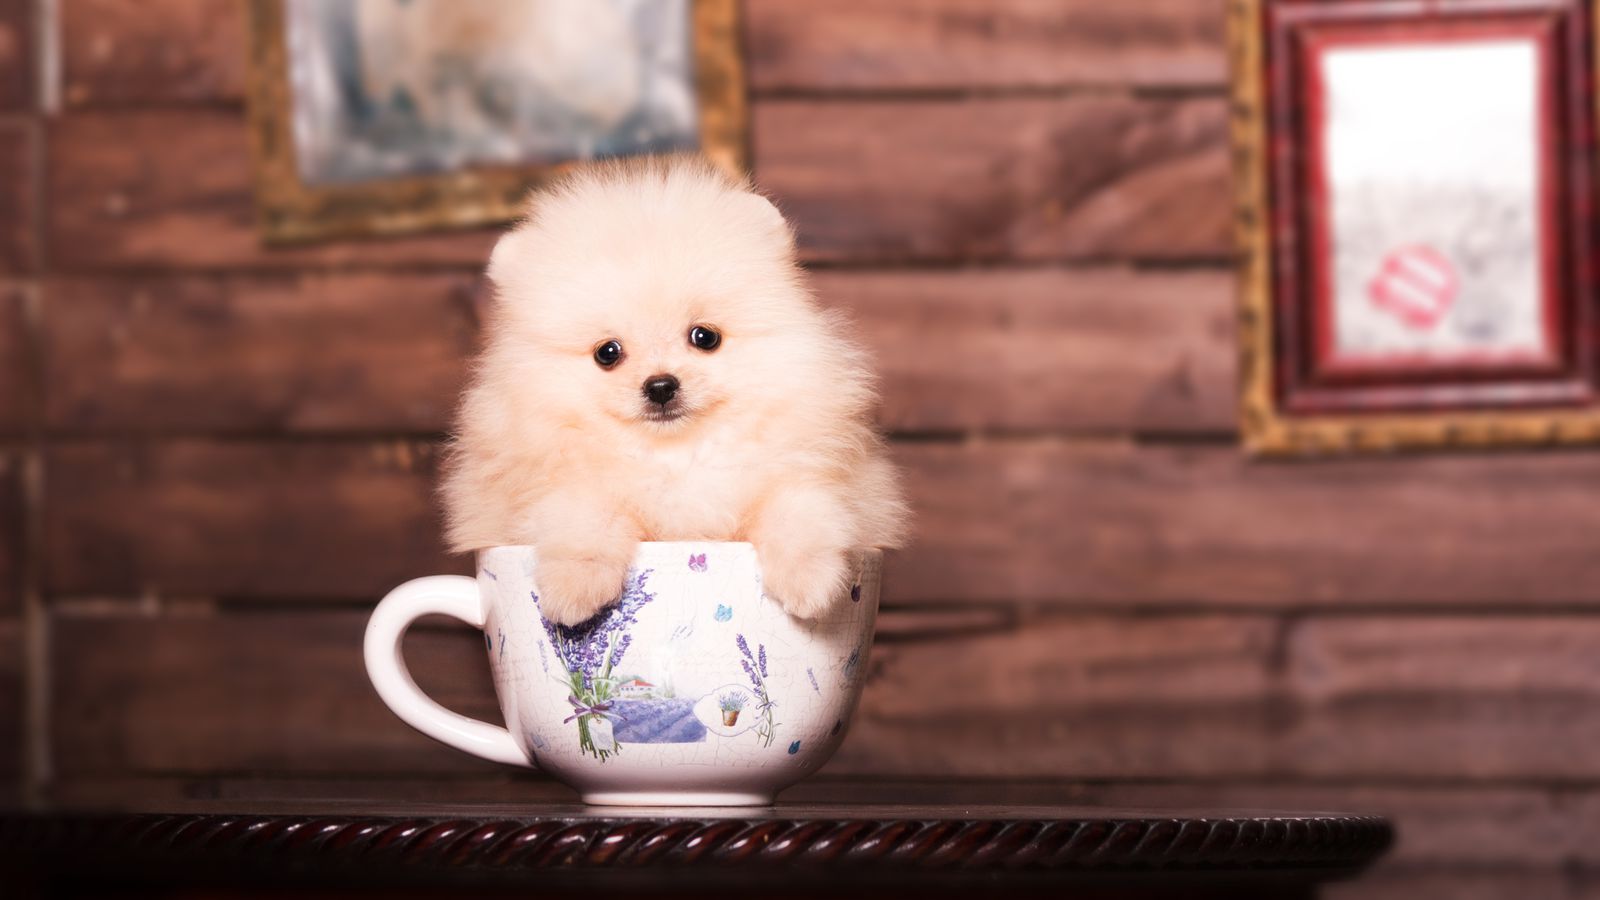 SF Might Get Its Very Own Puppy Café Eater SF